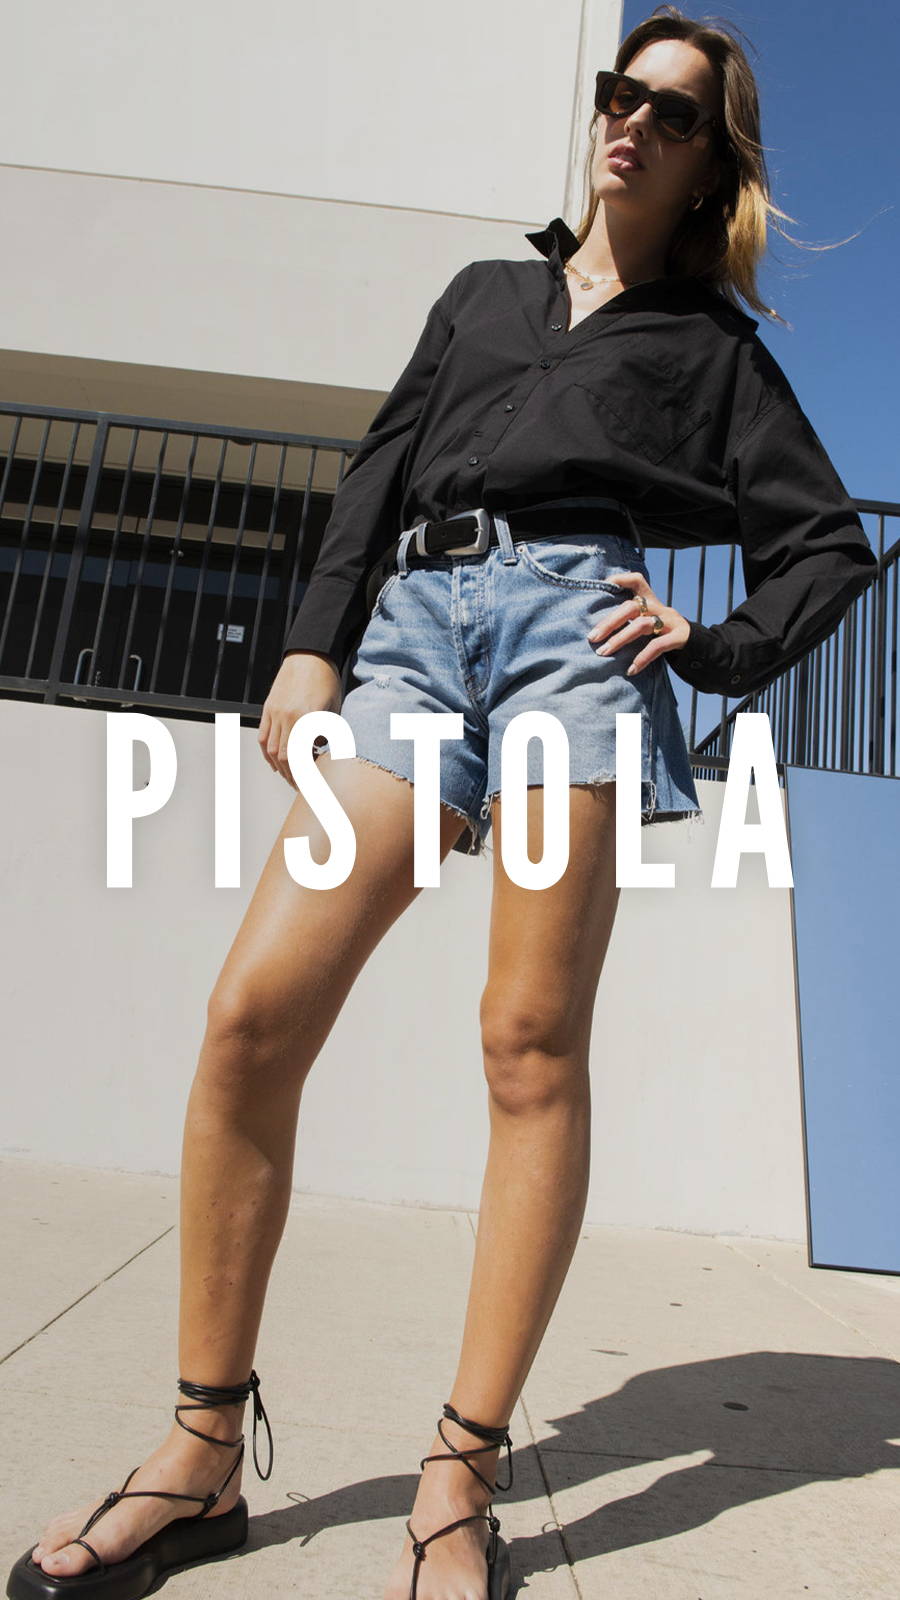 Woman in black button up and Pistola jean shorts modeling in front of a concrete wall